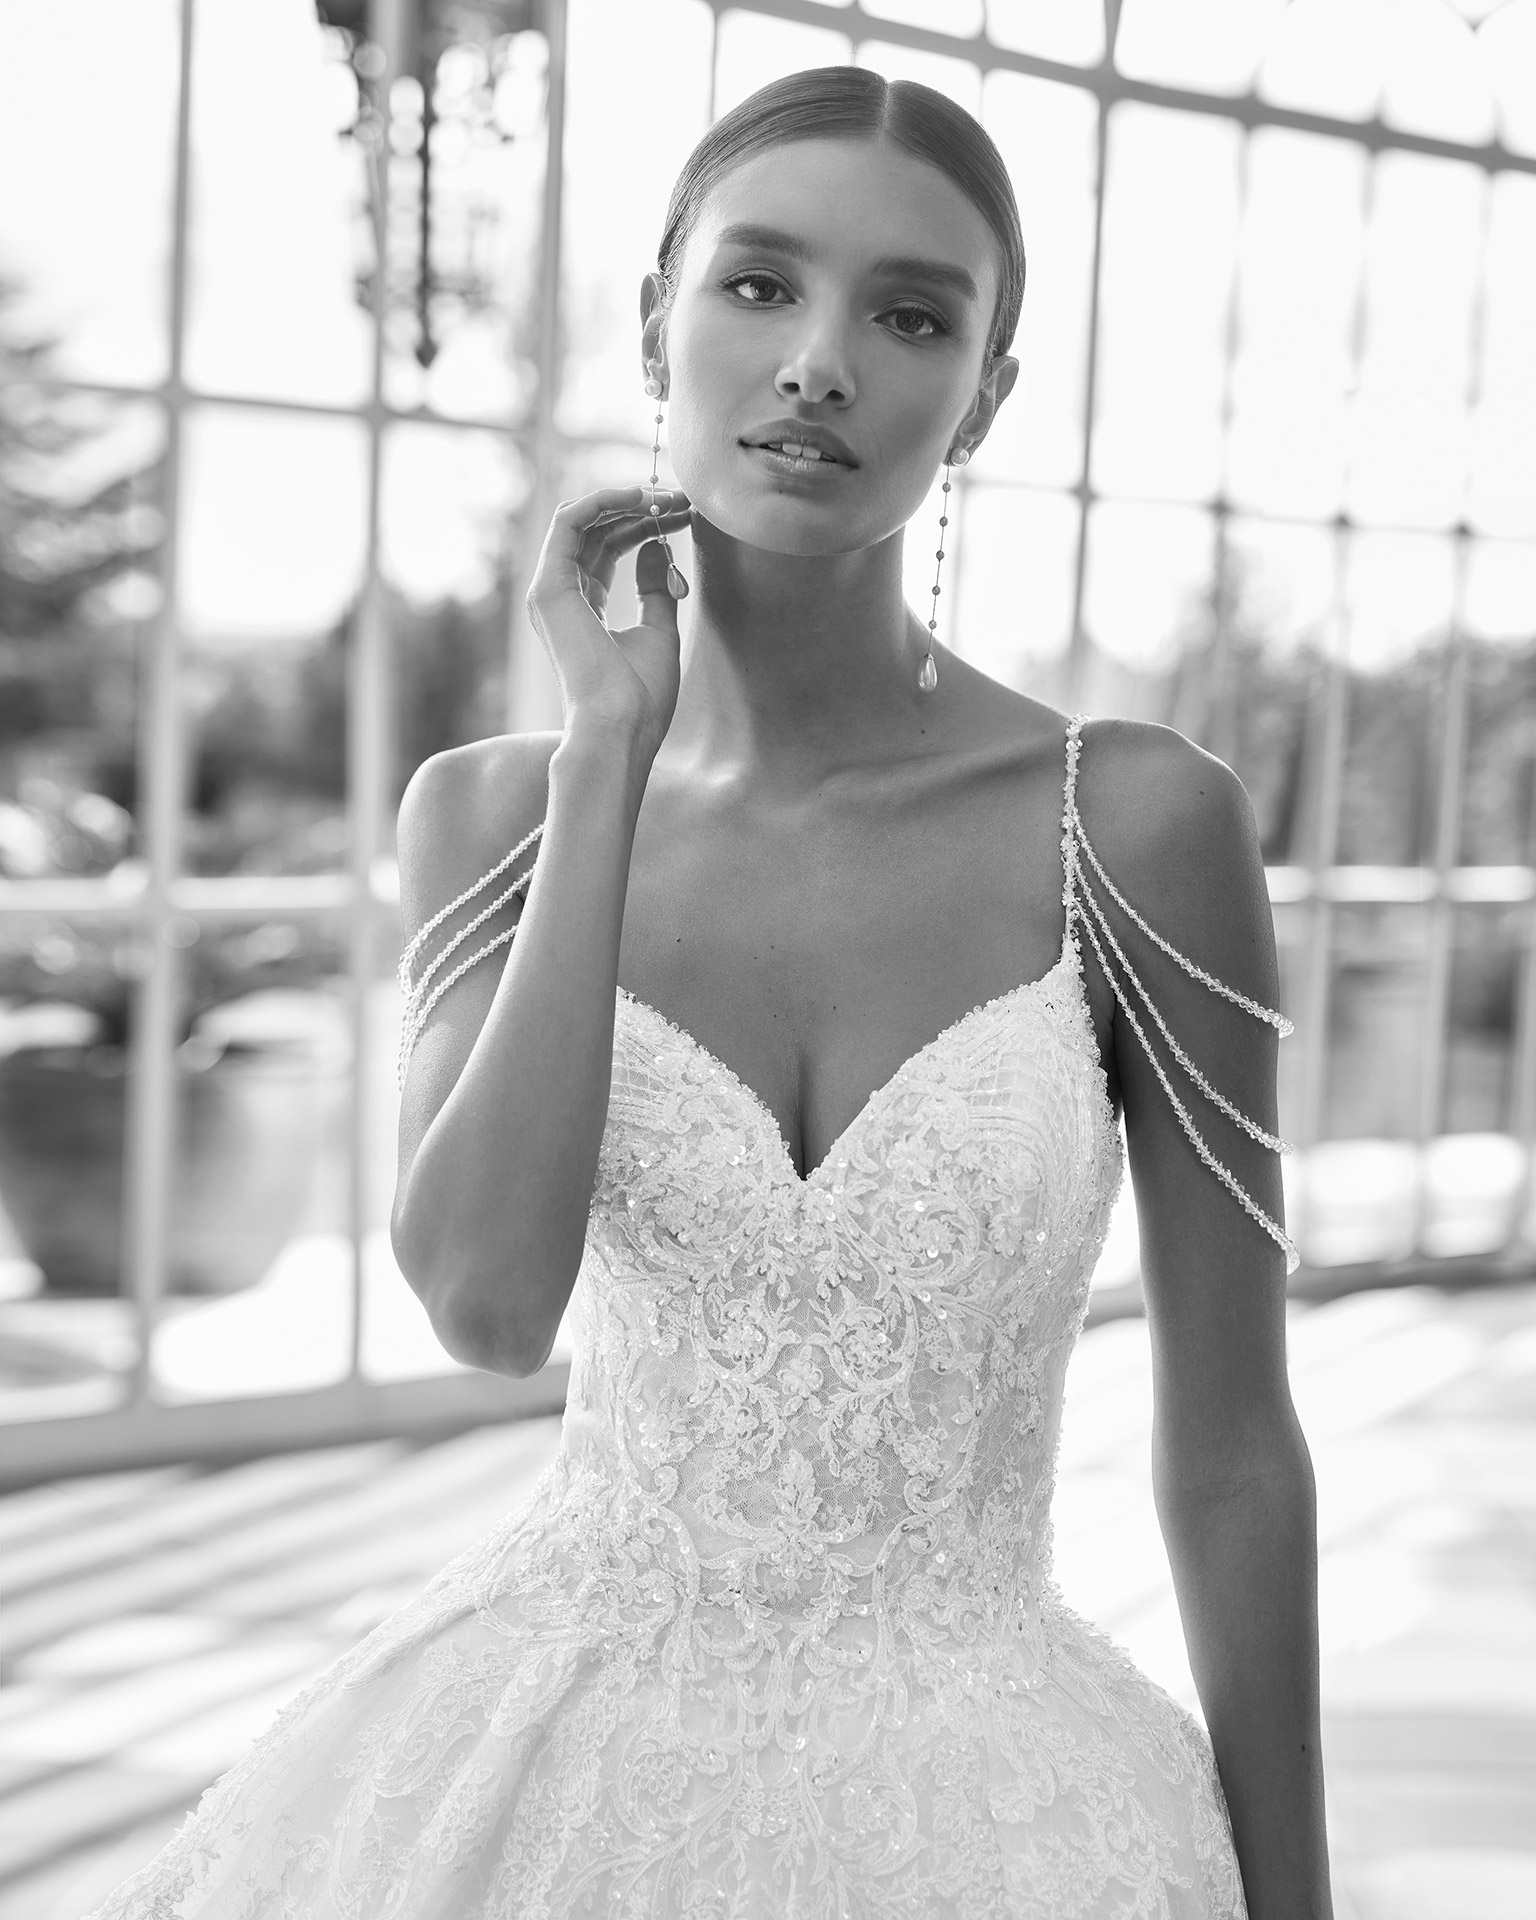 Princess-style wedding dress, featuring beadwork embellishments on the bodice and straps; with a sweetheart neckline, a corset back, and beadwork embroidered straps. Delicate Luna Studio outfit made of tulle combined with lace and beadwork. LUNA_NOVIAS.